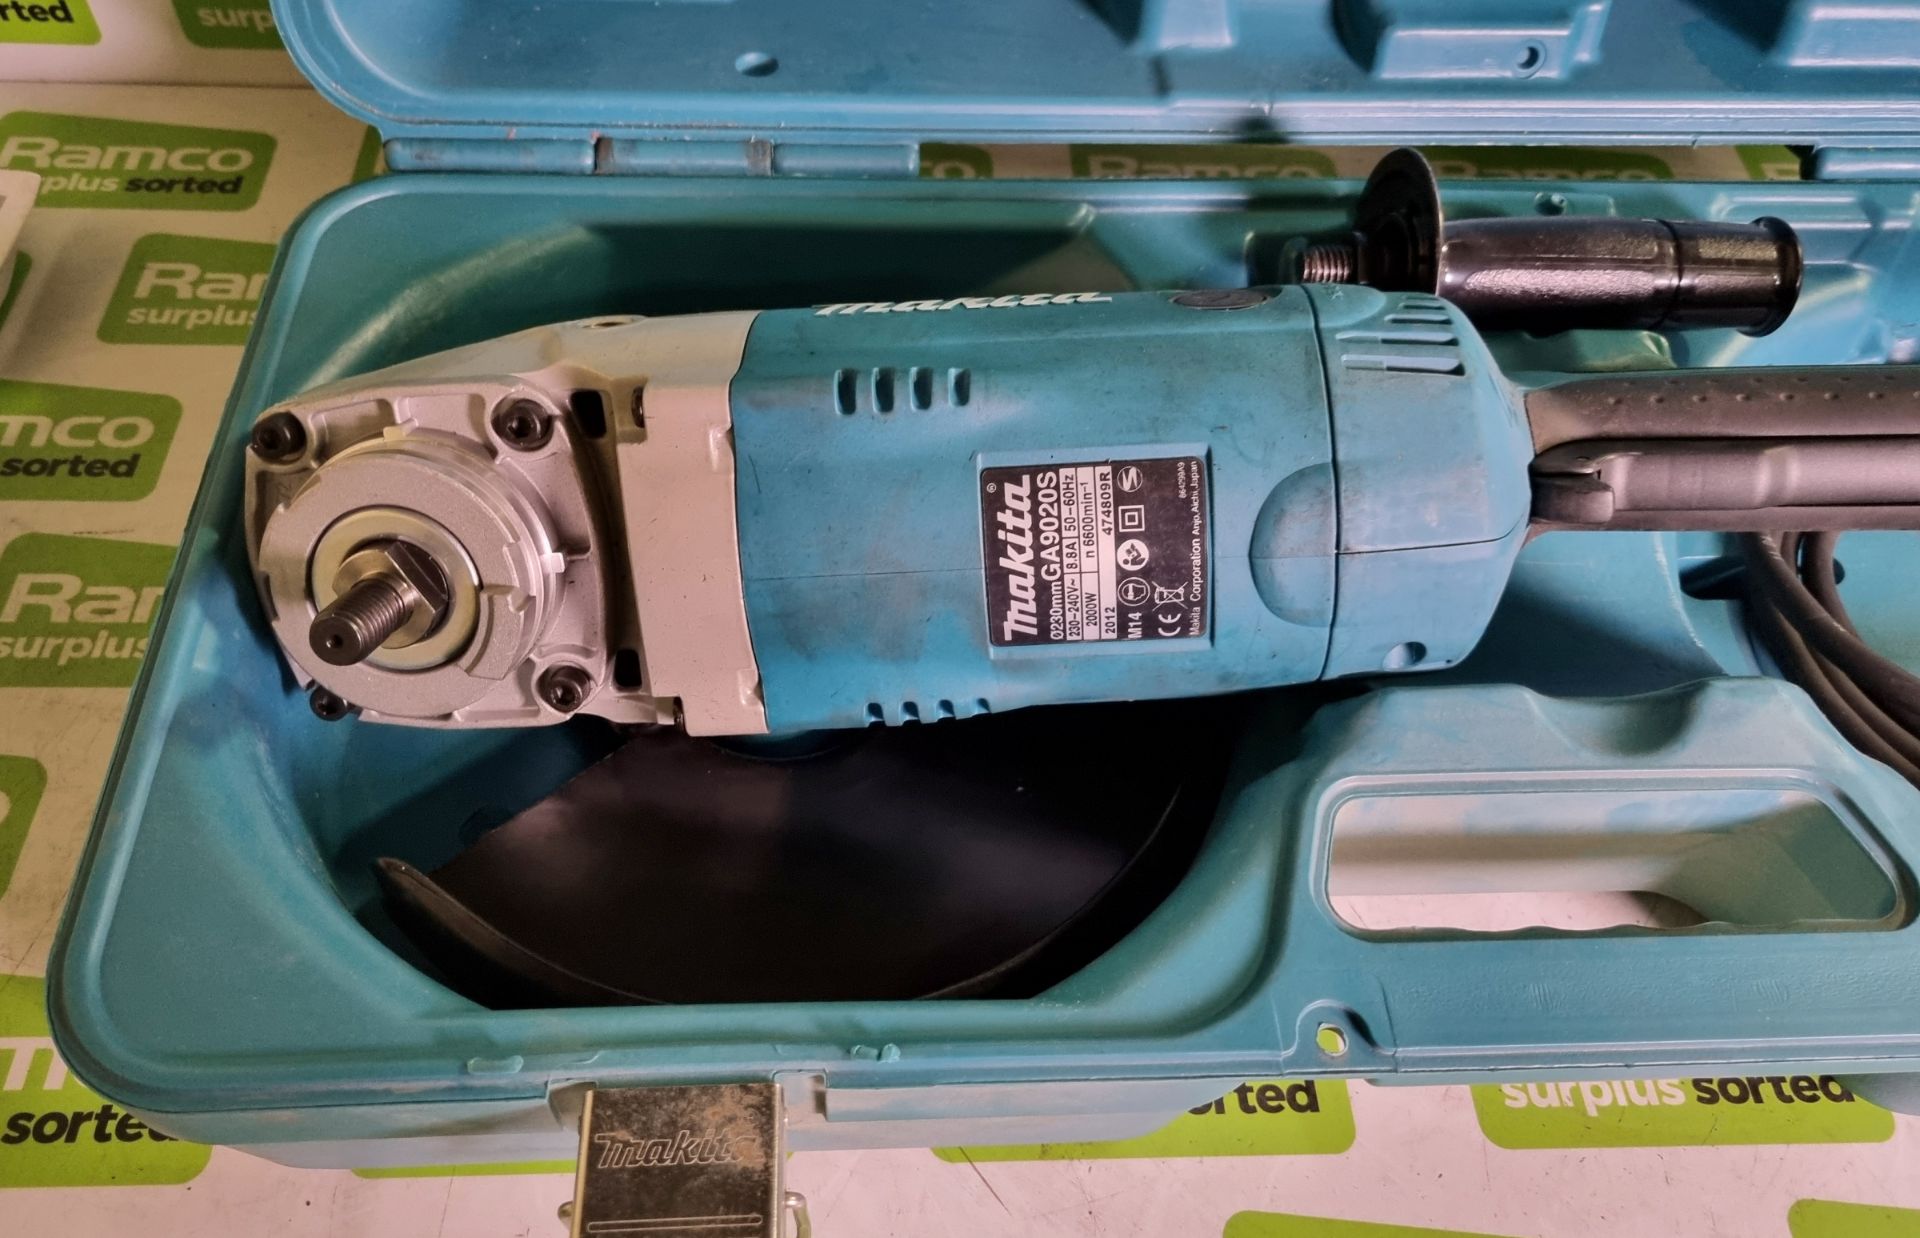 Makita GA9020S 9 inch electric angle grinder with case - 2000W - no discs - missing key - Image 2 of 7